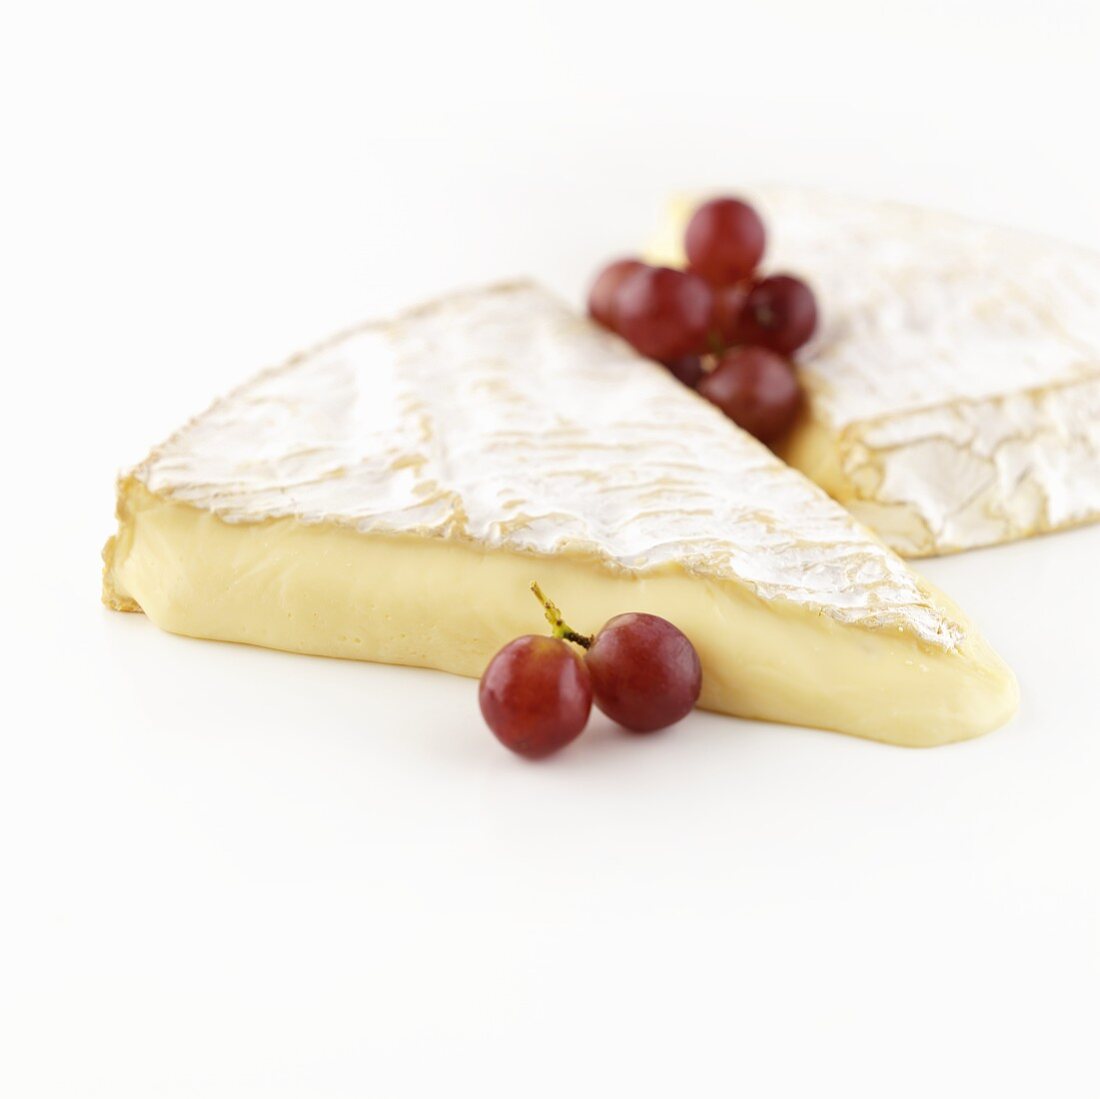 Brie de Meaux cheese with red grapes